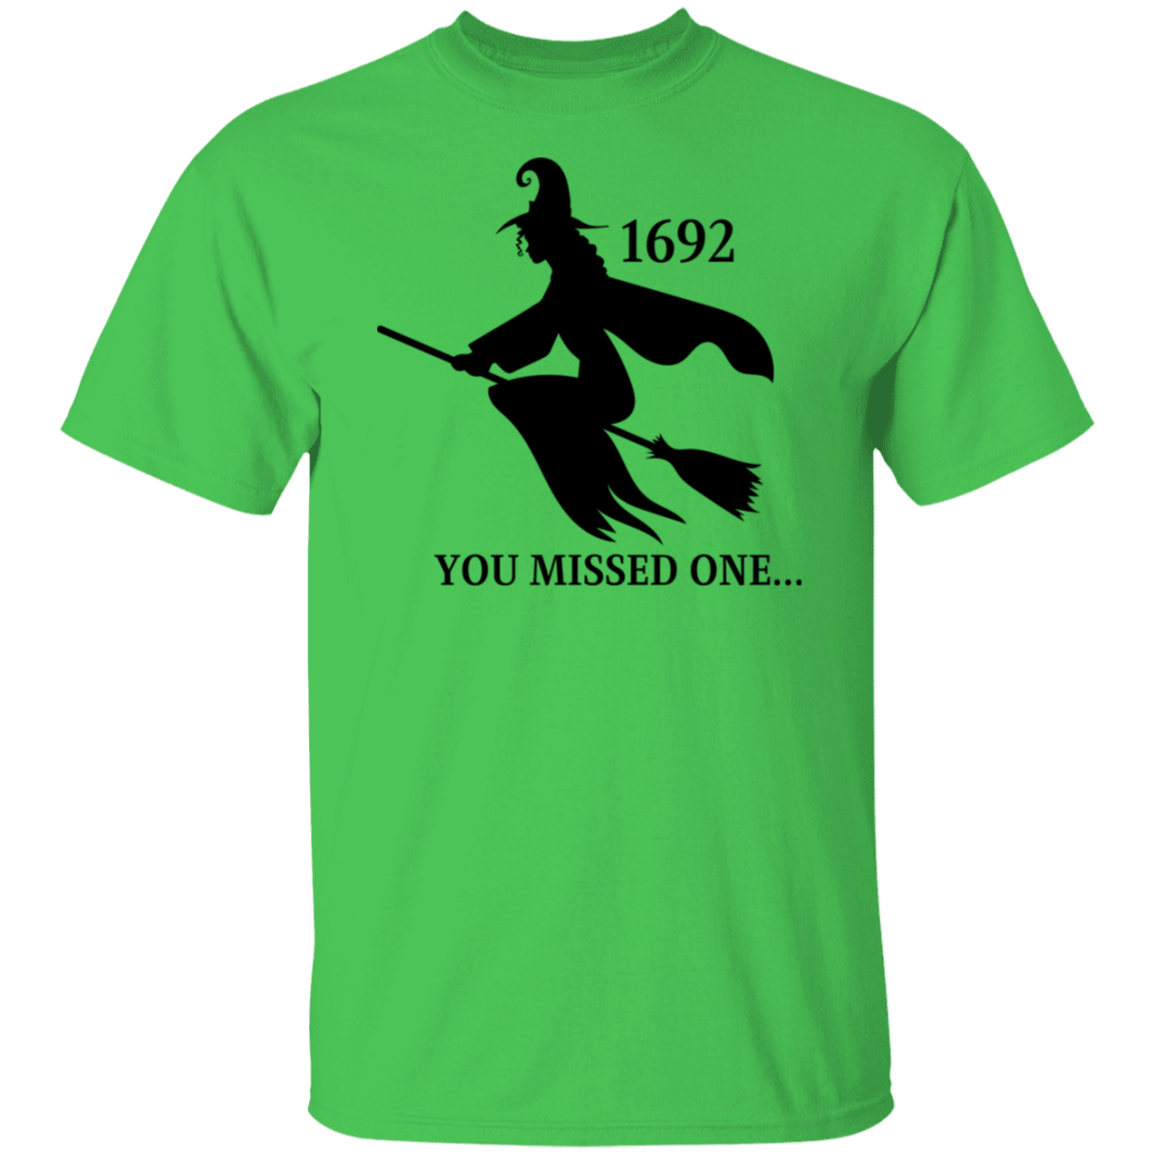 1692 you missed one T-Shirt